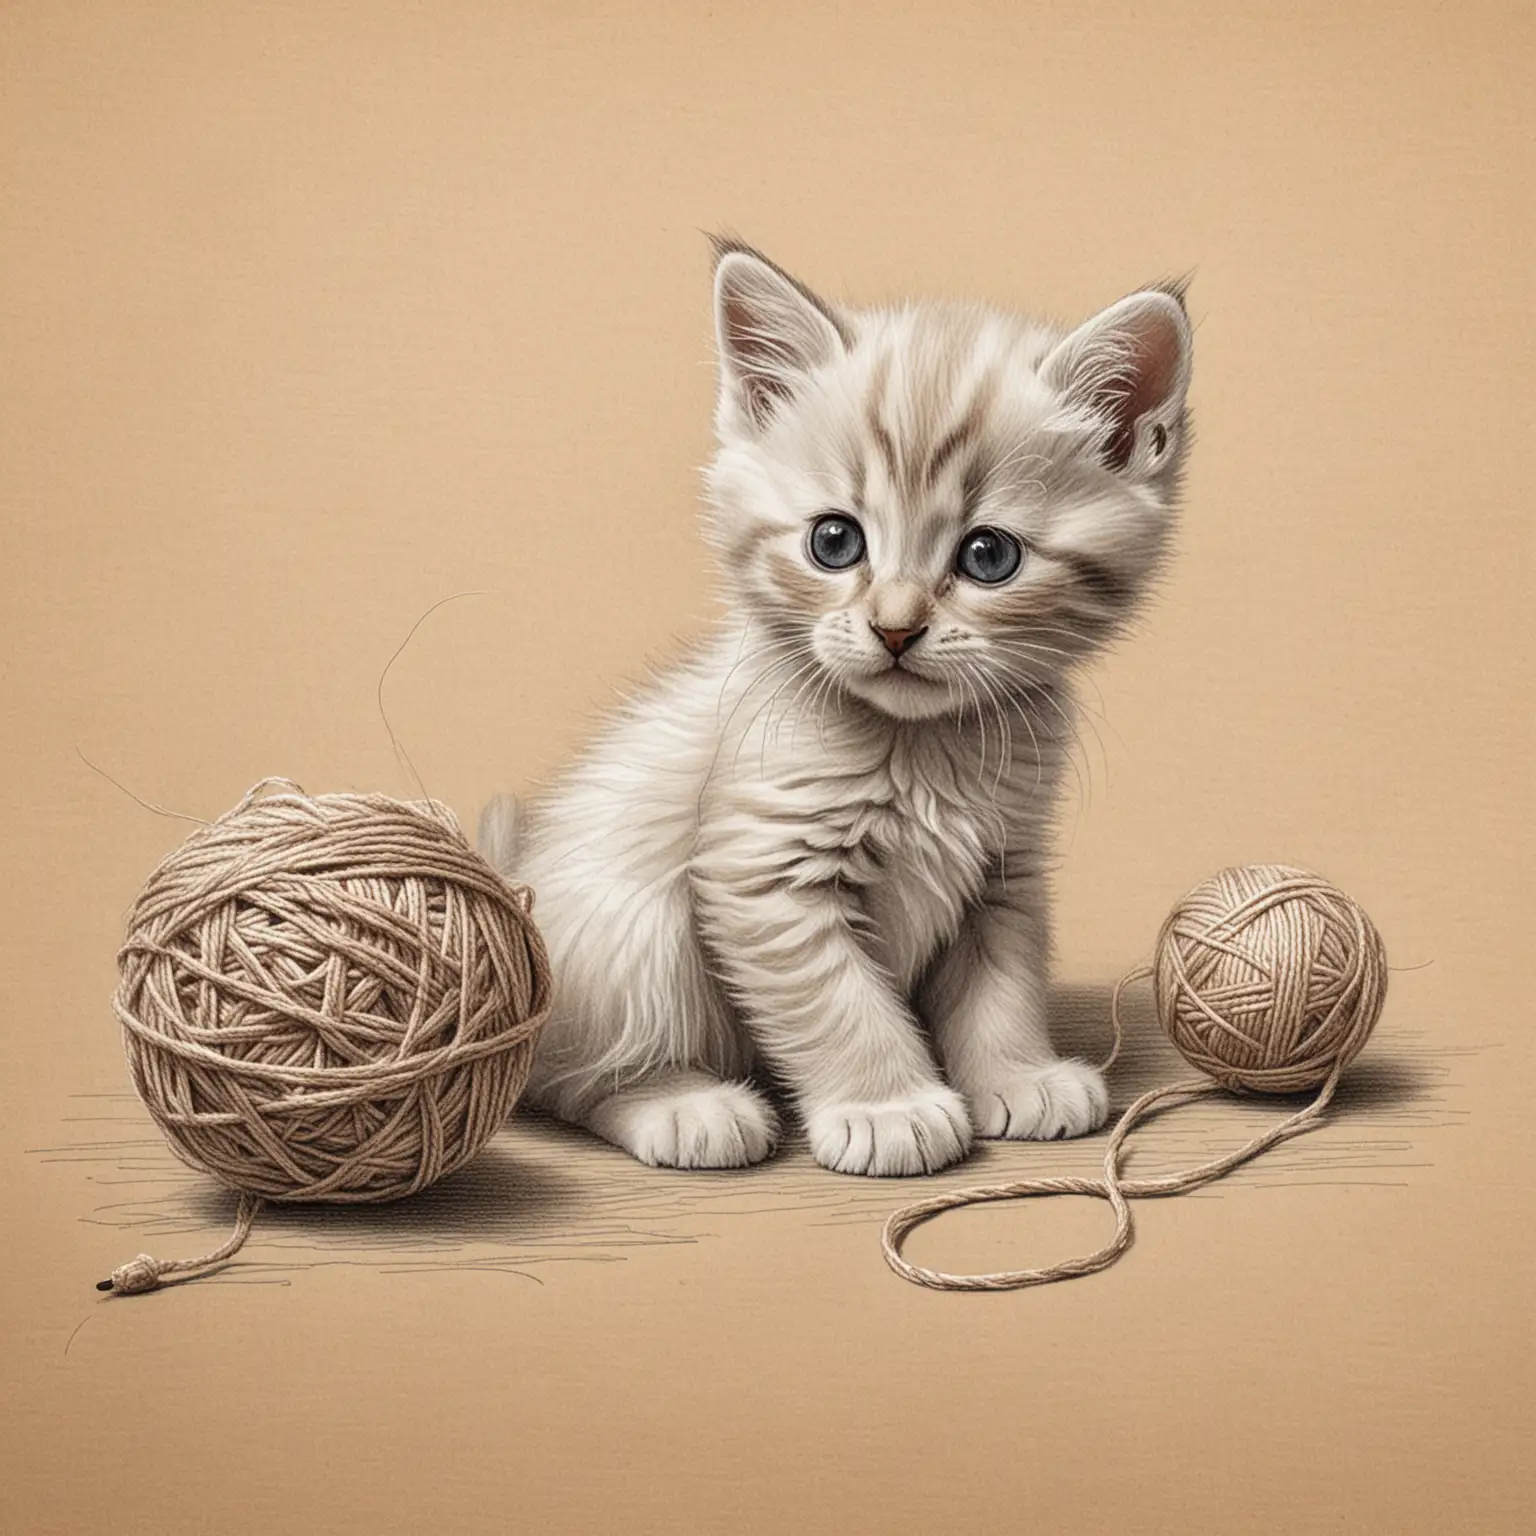 Adorable Kitten Sketch Playing with Yarn Ball